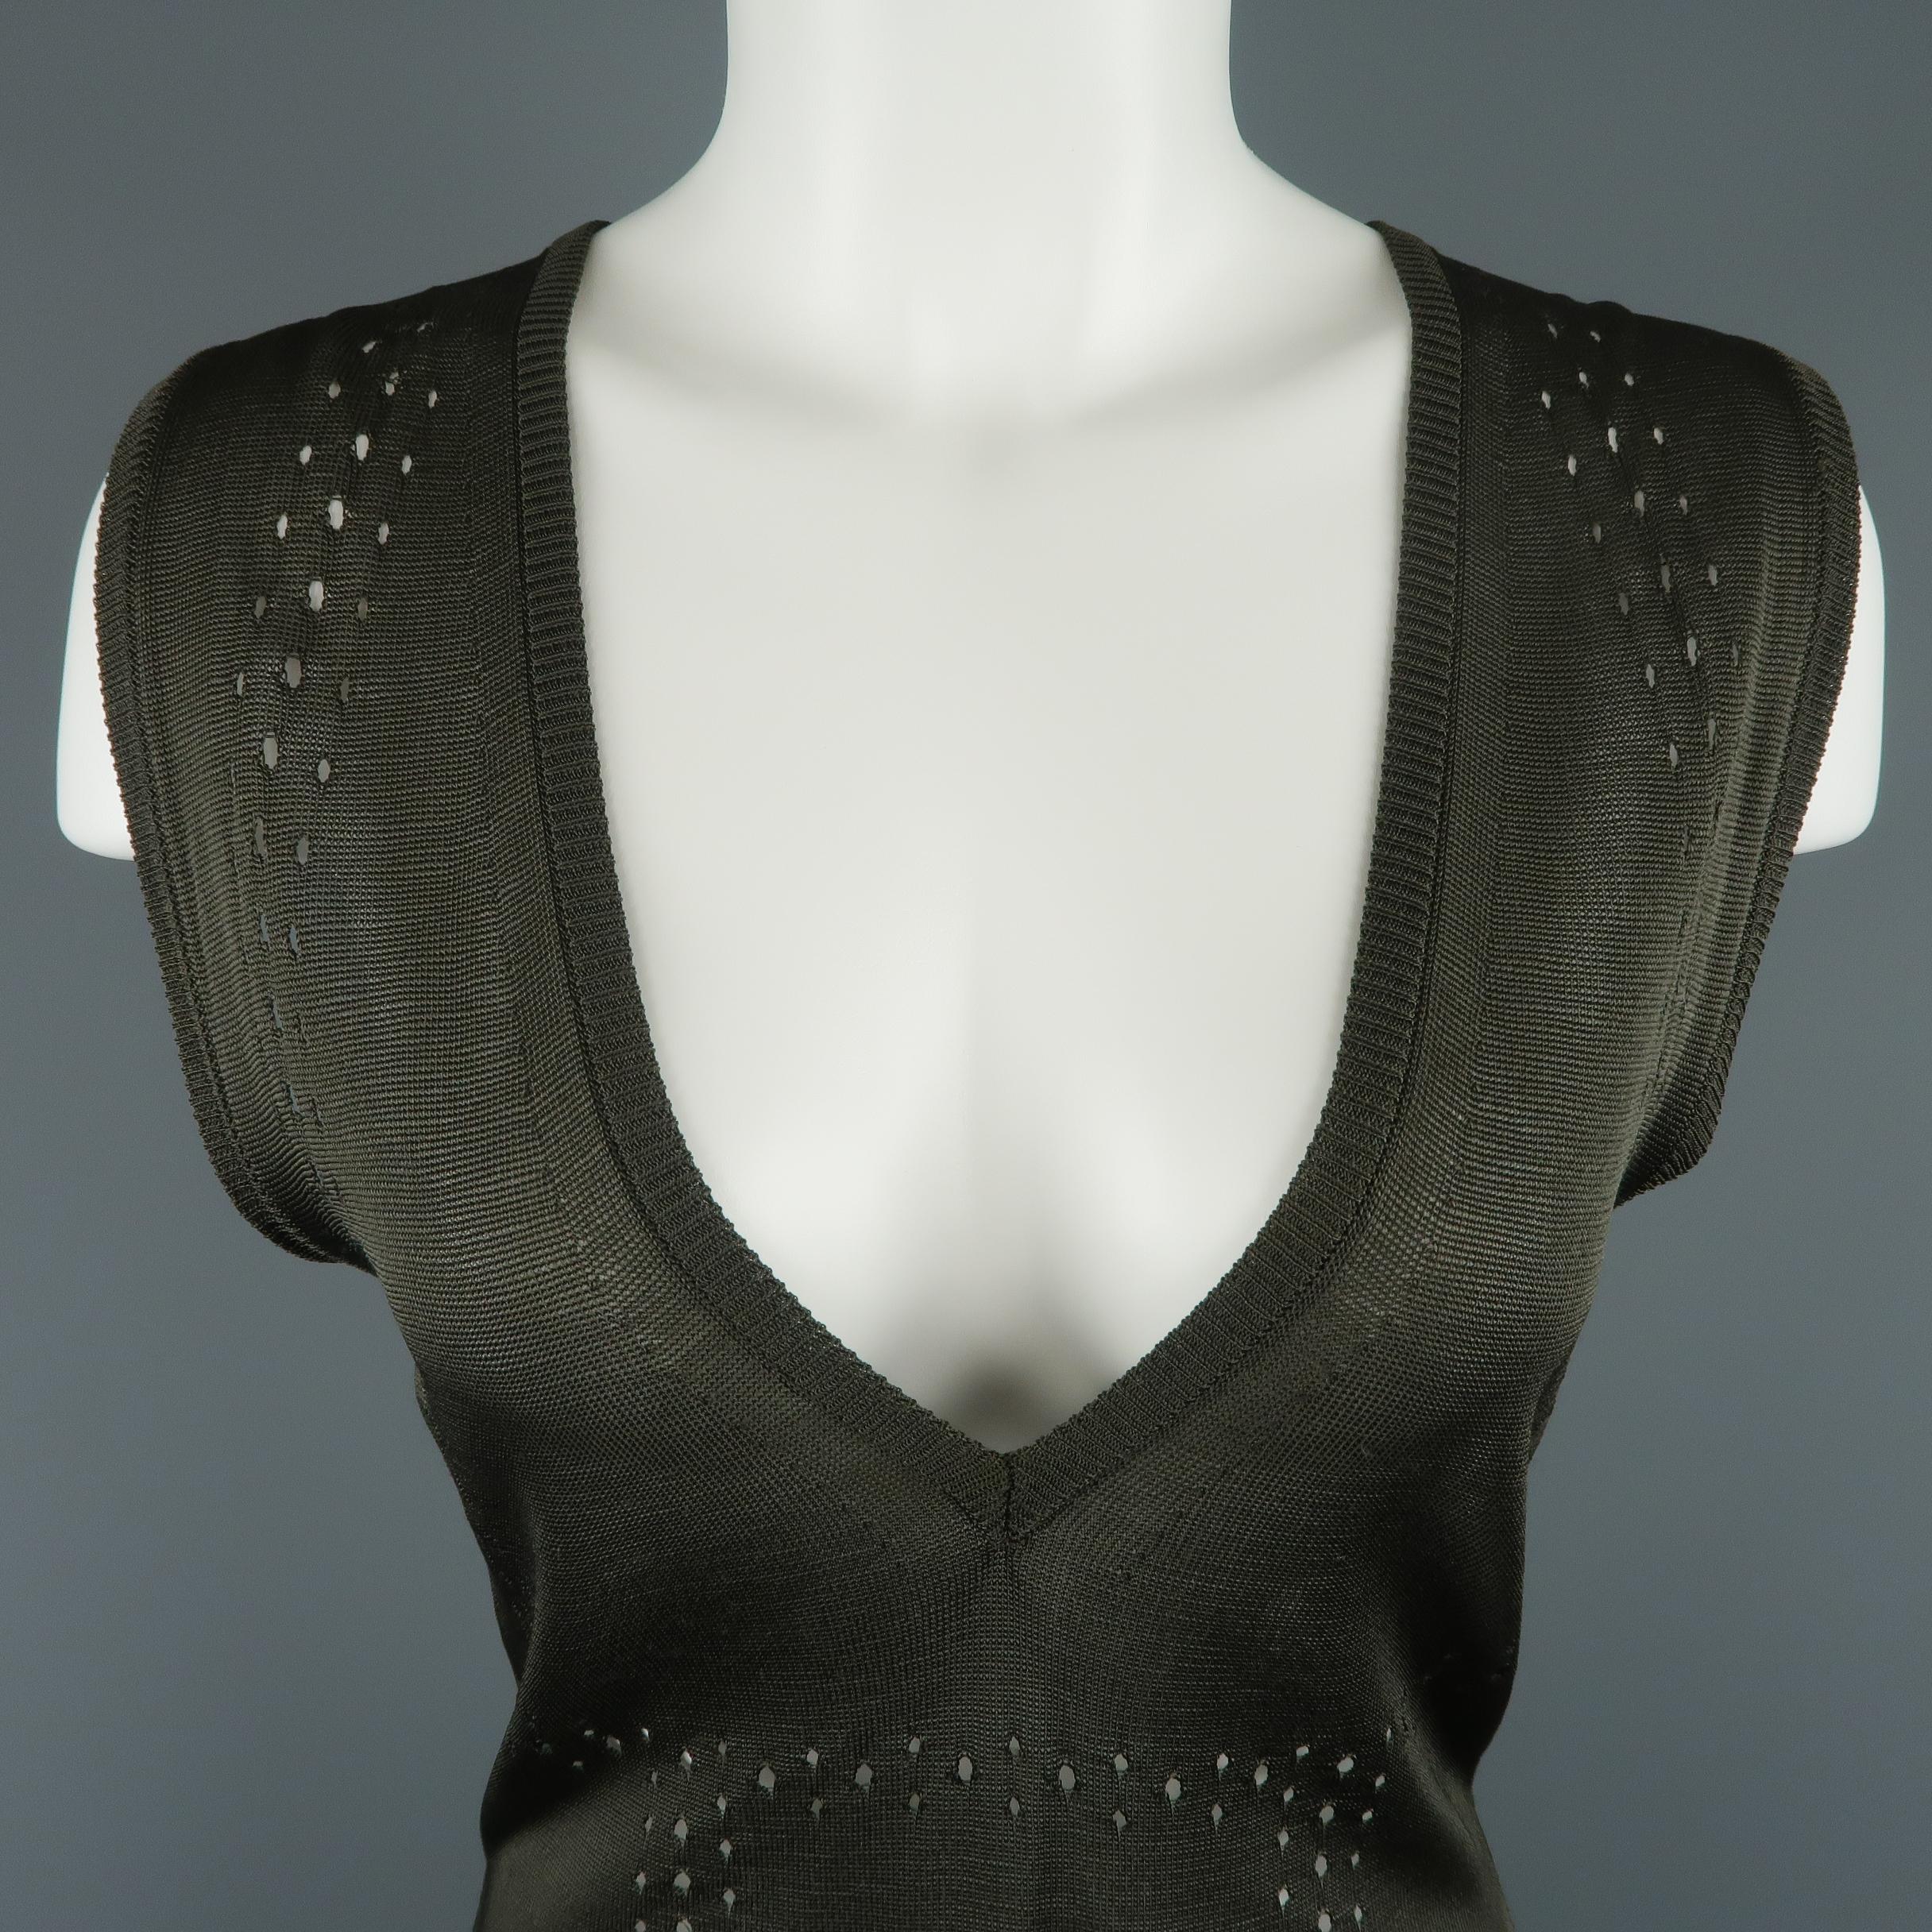 YVES SAINT LAURENT by TOM FORD vest comes in a muted moss green gray viscose knit with a v neck and mesh cross stripes. Made in Italy.
 
Good Pre-Owned Condition.
Marked: L
 
Measurements:
 
Shoulder: 16 in.
Bust: 35 in.
Length: 26 in.